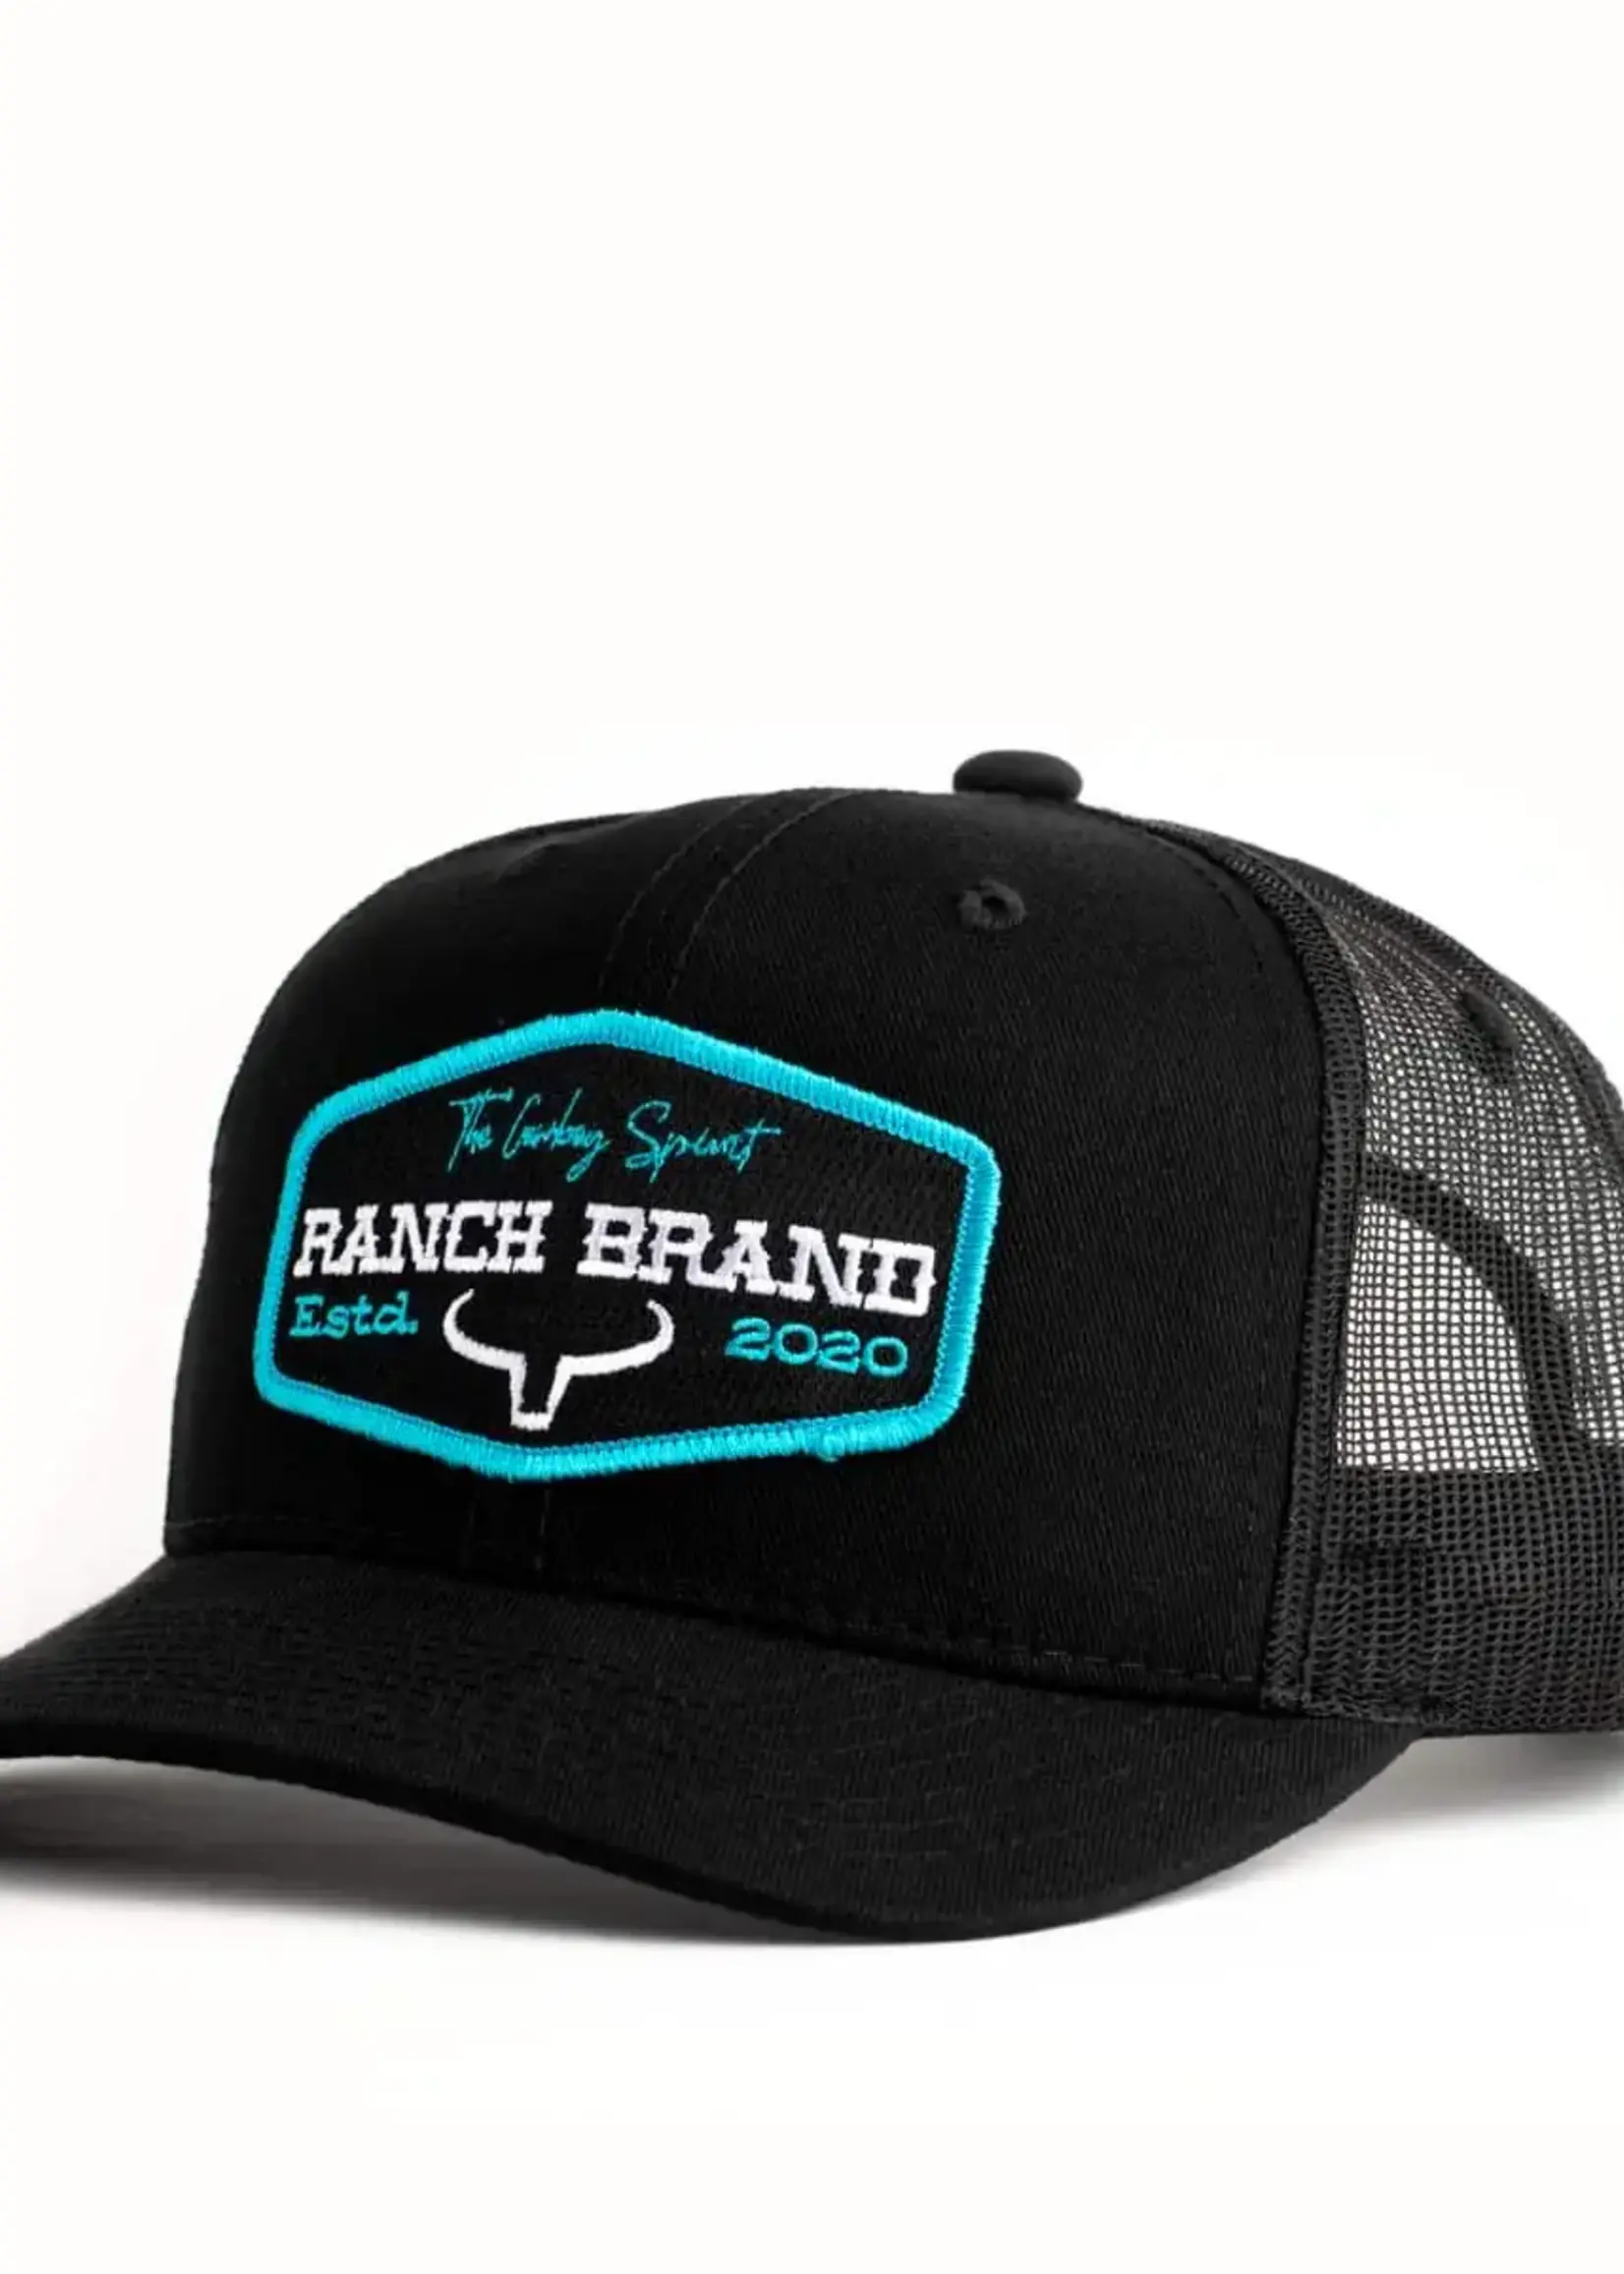 RANCH BRAND RANCHBRAND-CASQUETTE-PATCHRANCH